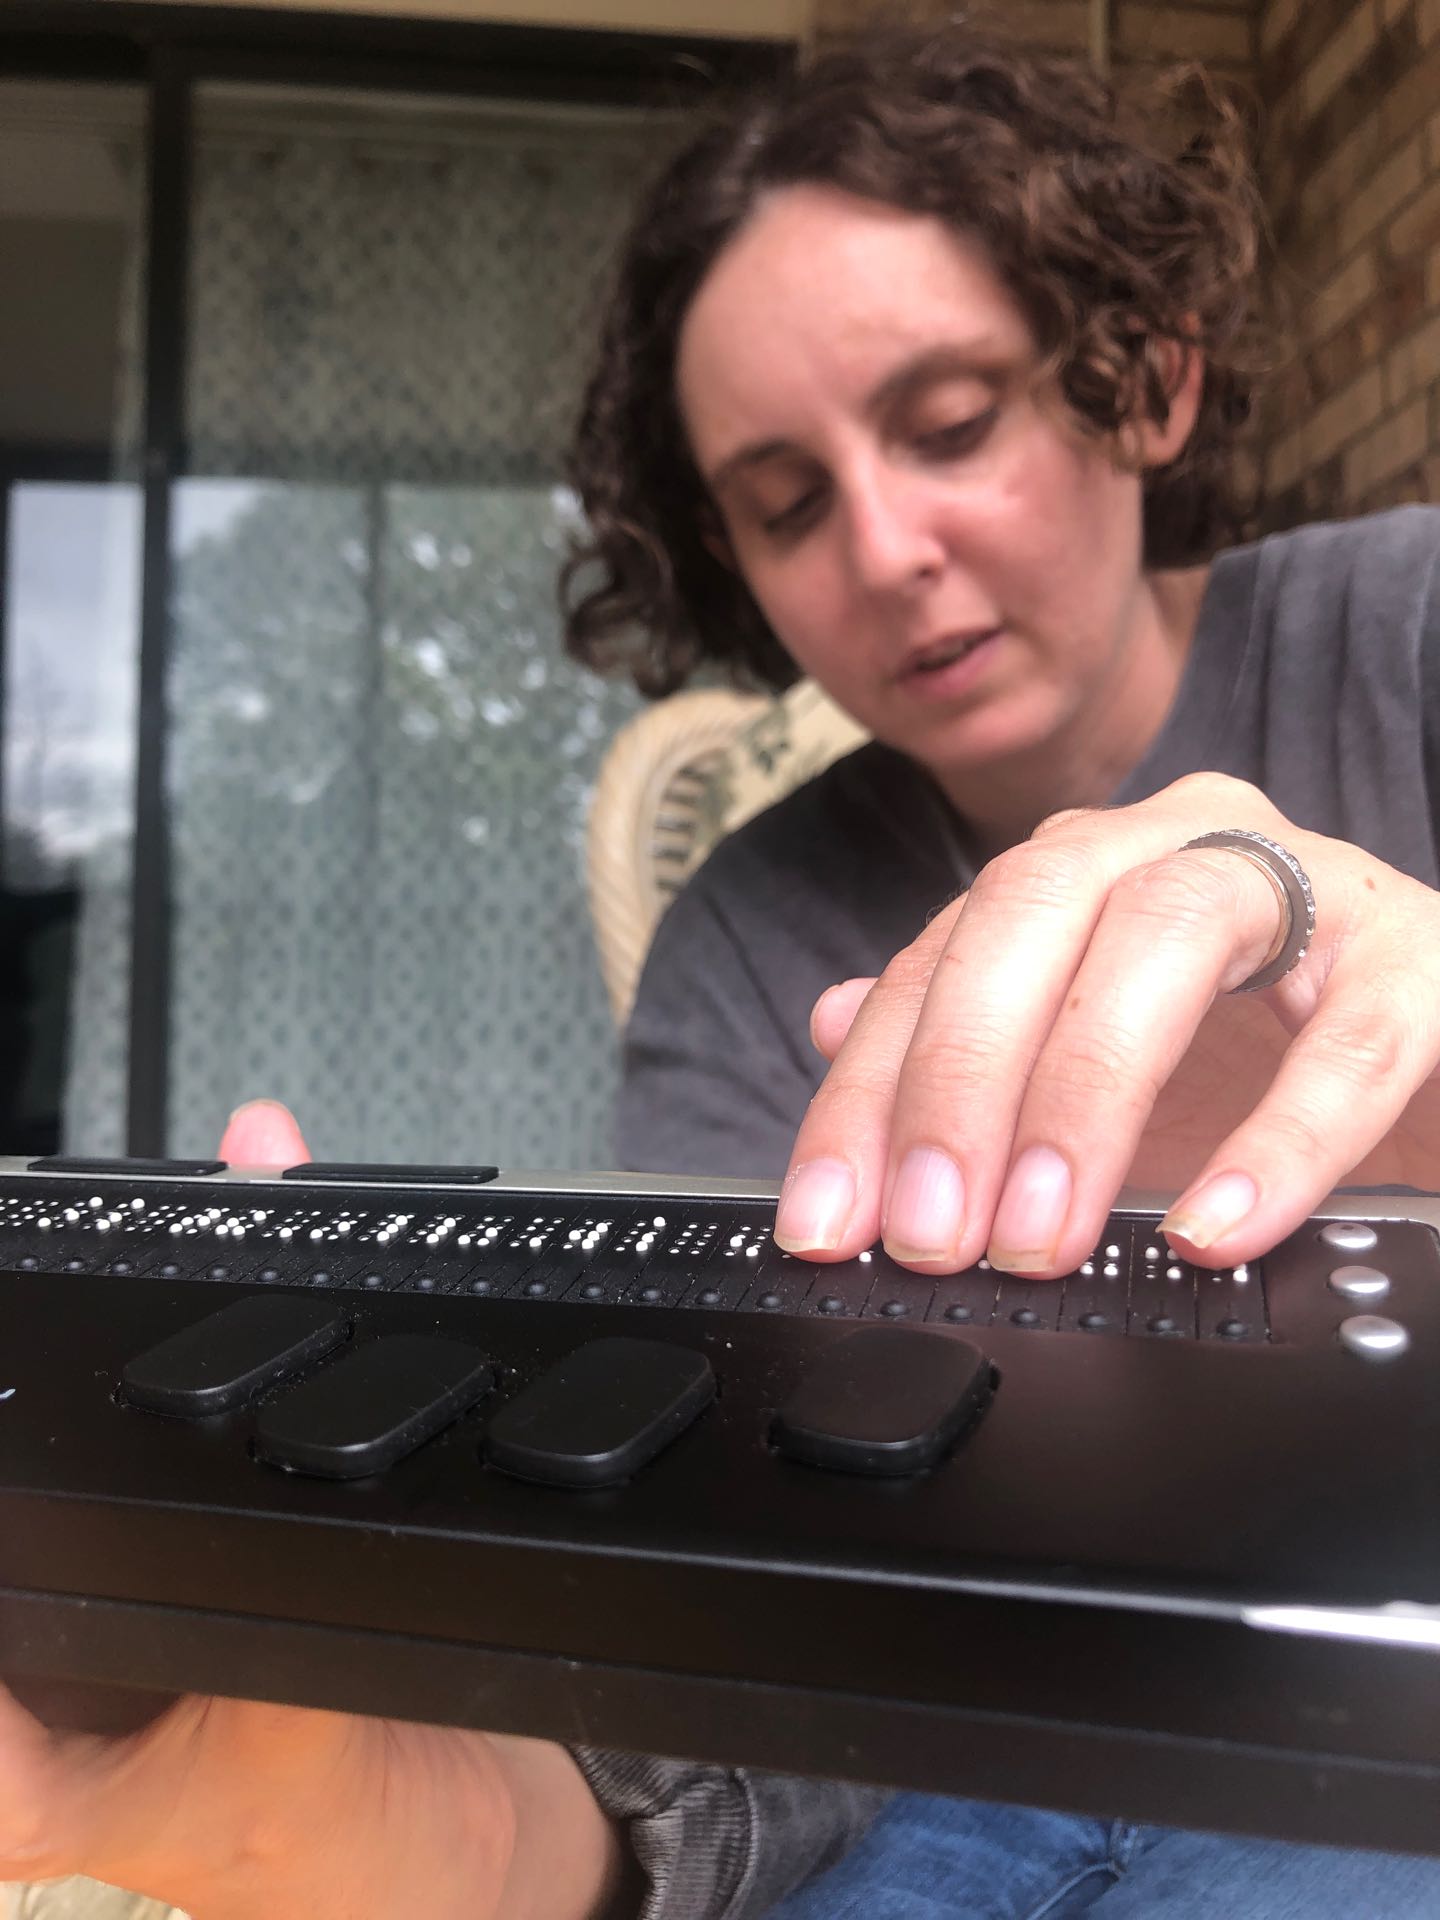 A white woman with short curly brown hair, with her hand on a braille reader